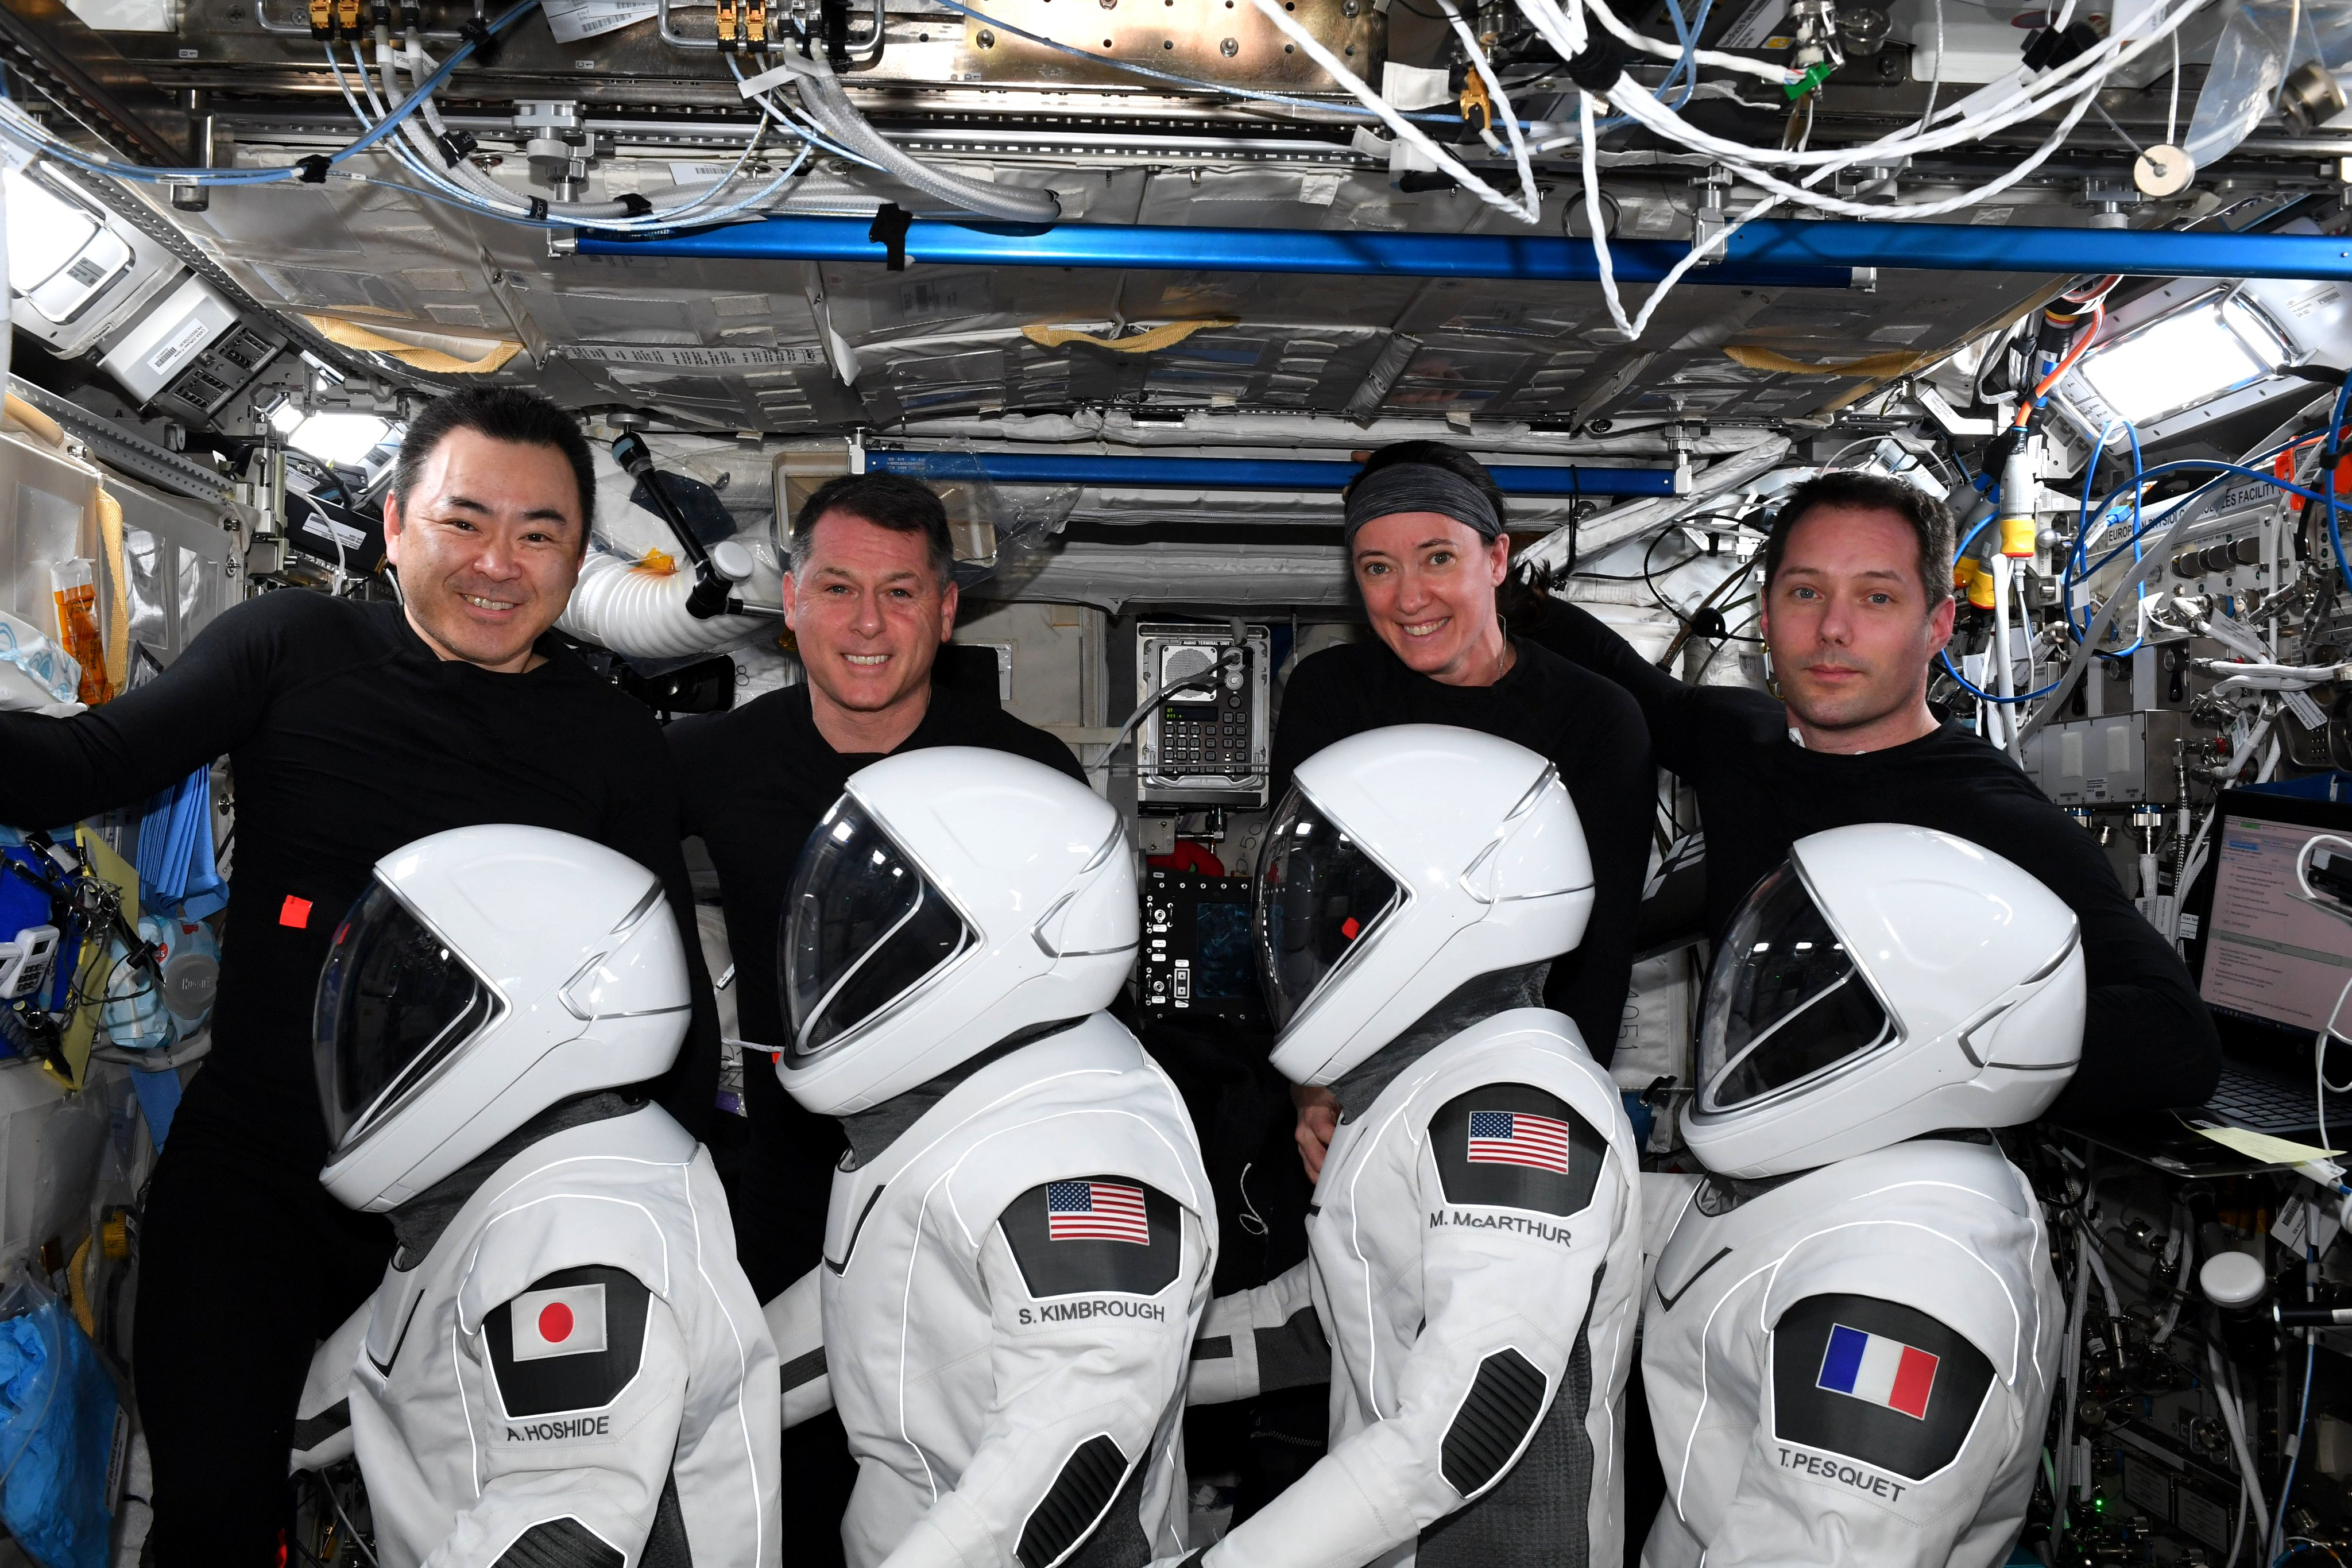 The four astronauts of NASA and SpaceX's Crew-2 mission pose with their launch and entry suits as they wrap up a six-month mission to the International Space Station. They are: (from left) Akihiko Hoshide of the Japan Aerospace Exploration Agency, Shane Kimbrough and Megan McArthur of NASA and Thomas Pesquet of European Space Agency.